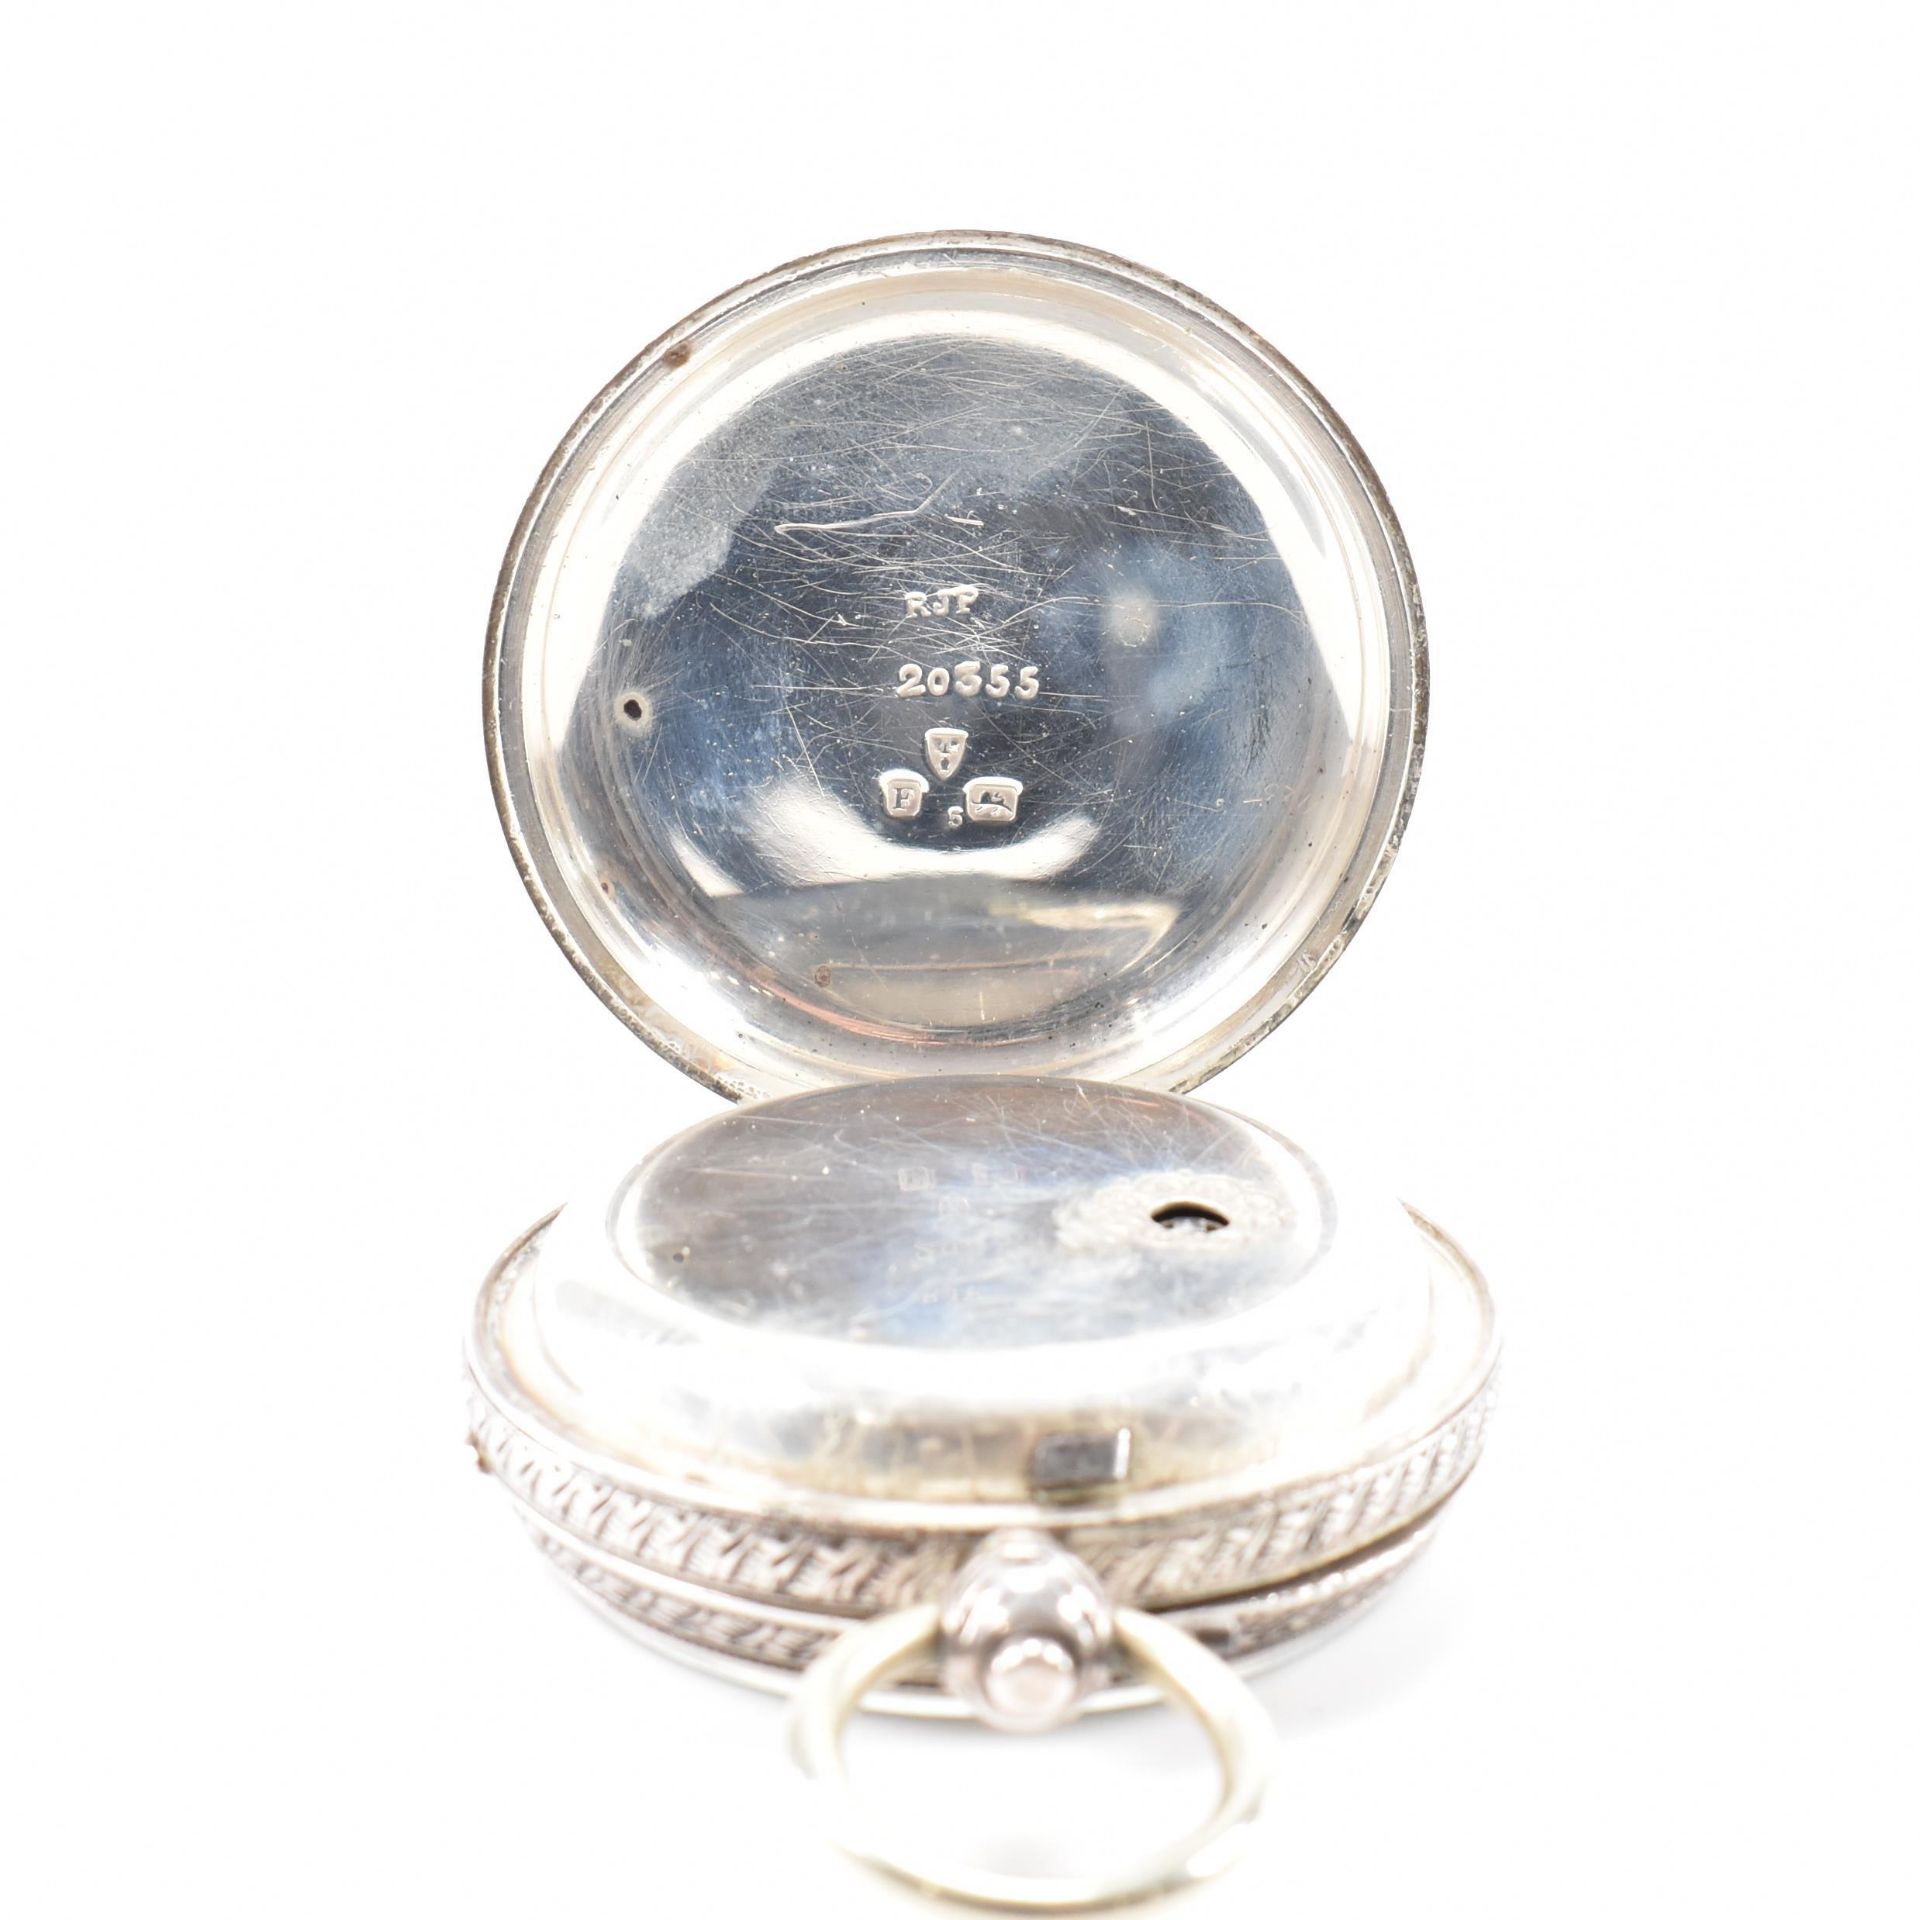 VICTORIAN SILVER OPEN FACE POCKET WATCH - Image 4 of 7